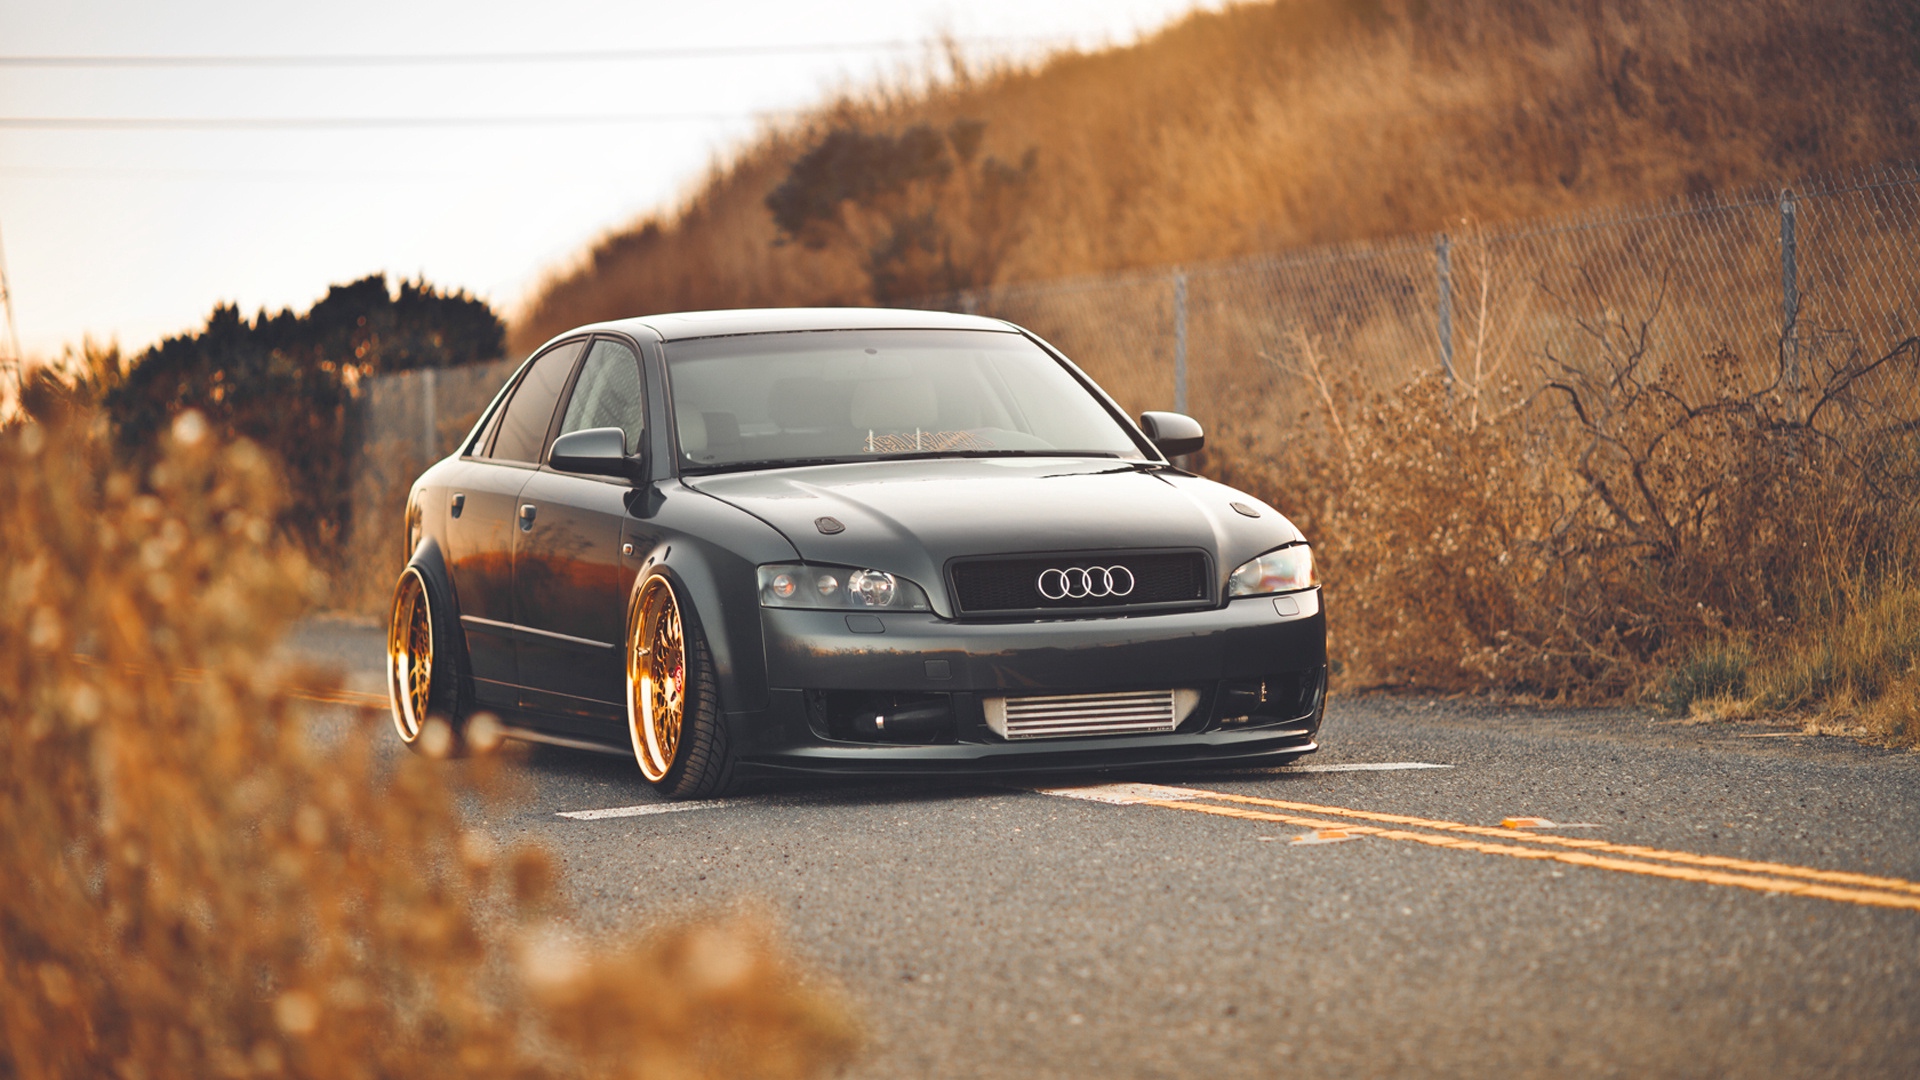 Wallpaper Audi A4 Autumn Gold - Fast And Furious Audi , HD Wallpaper & Backgrounds